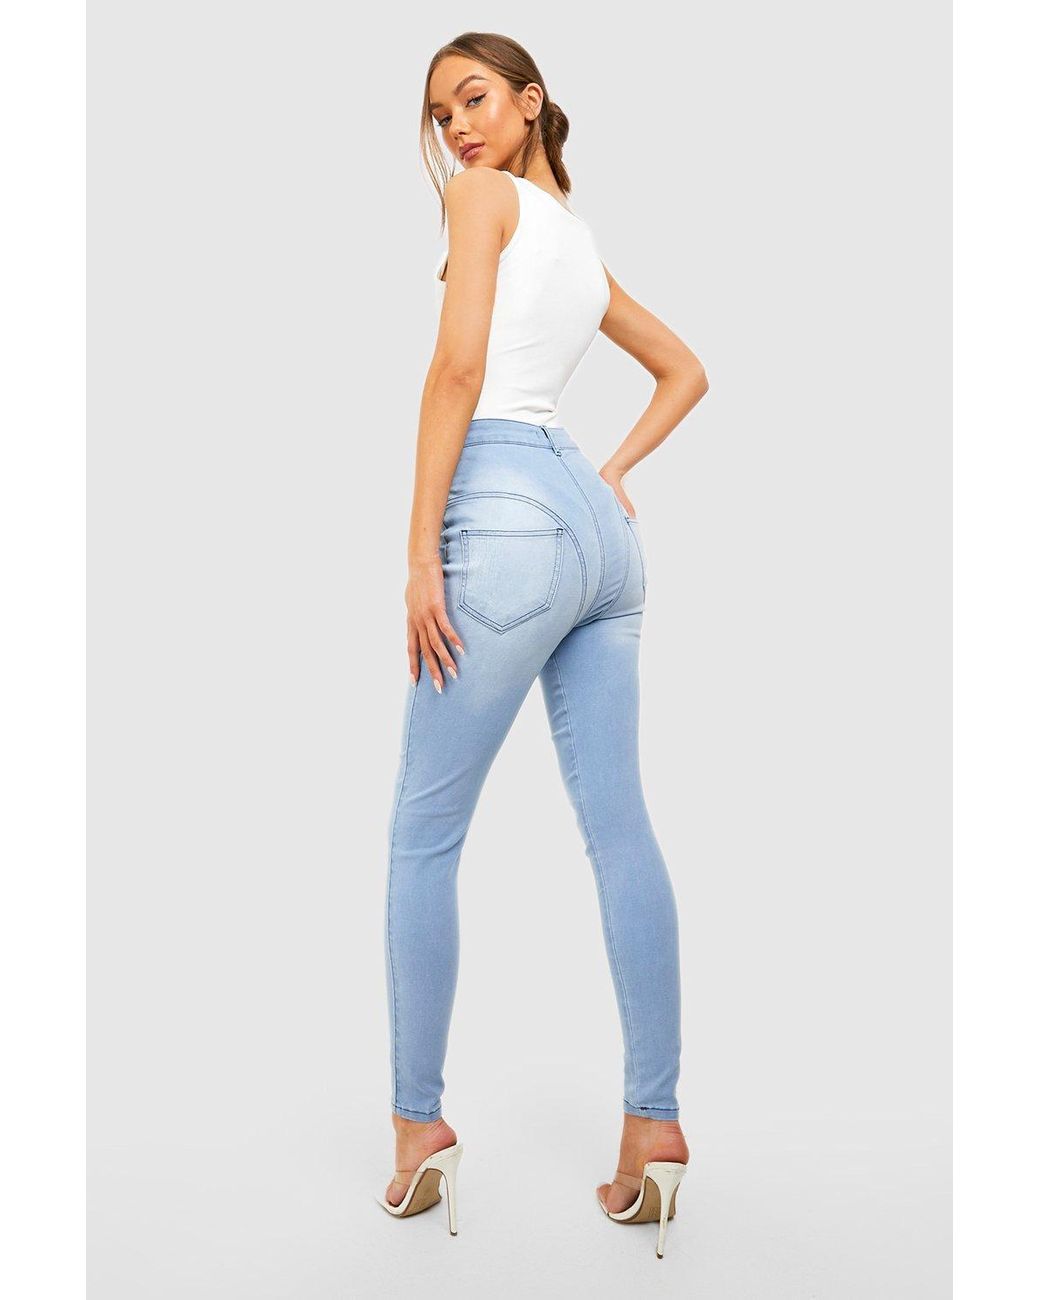 Boohoo Sculpt Seam High Waisted Skinny Jeans in Blue | Lyst